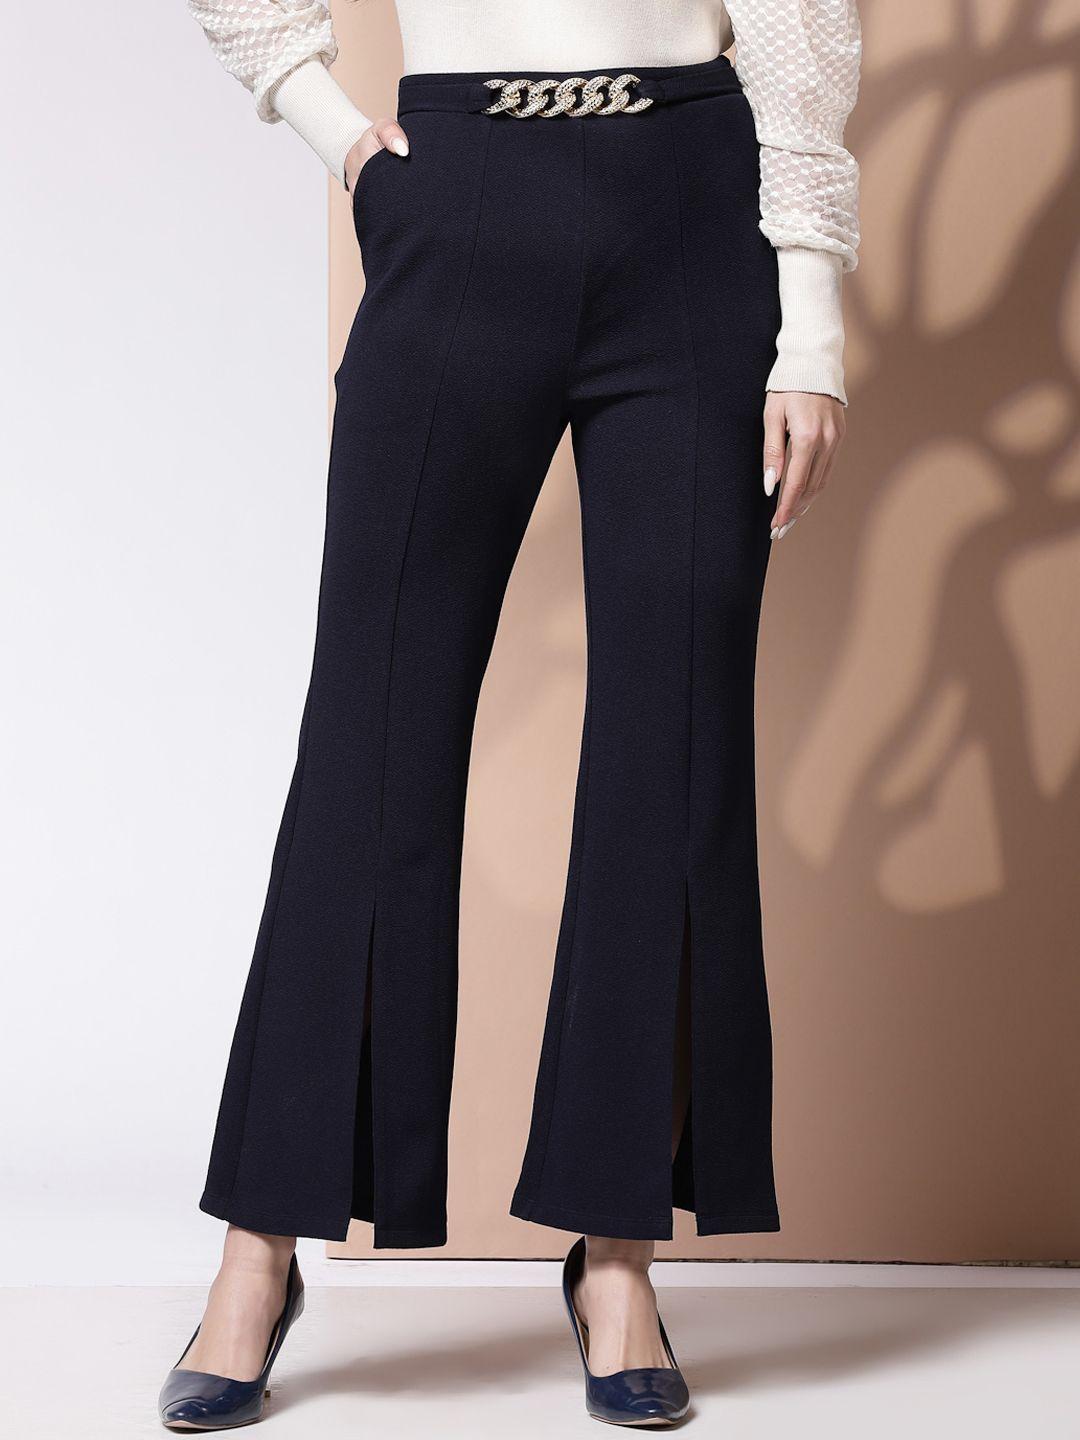 kassually-women-flared-high-rise-trousers